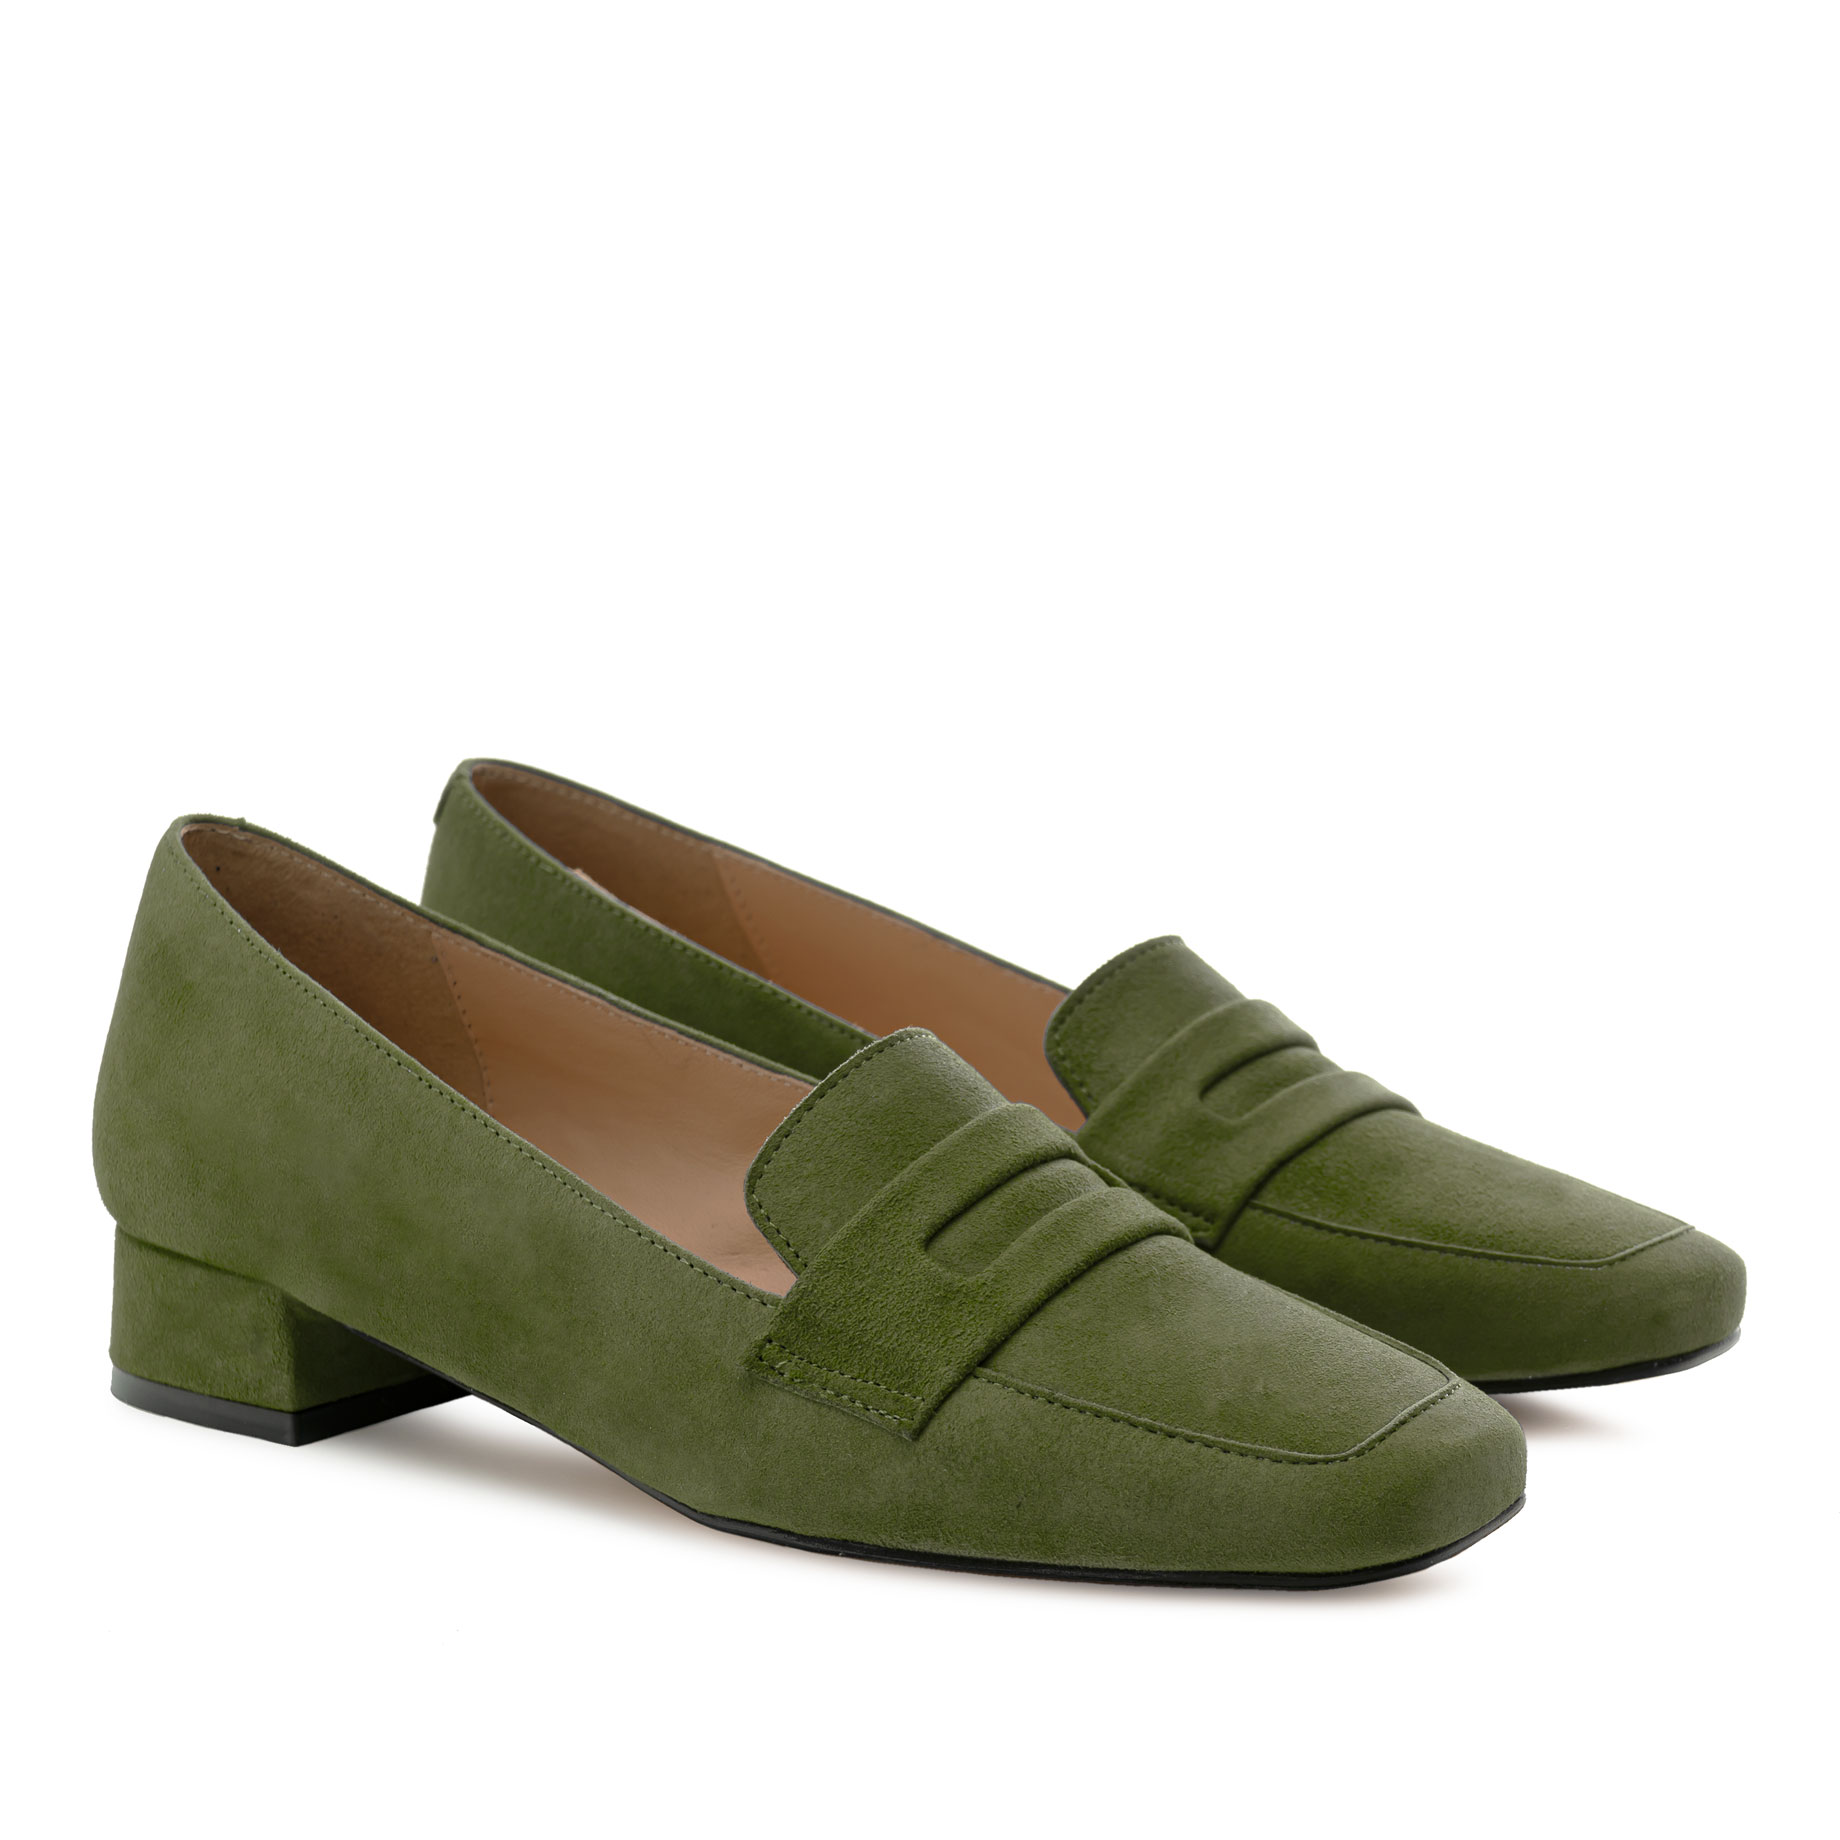 Moccasins in Olive Green Suede Leather 